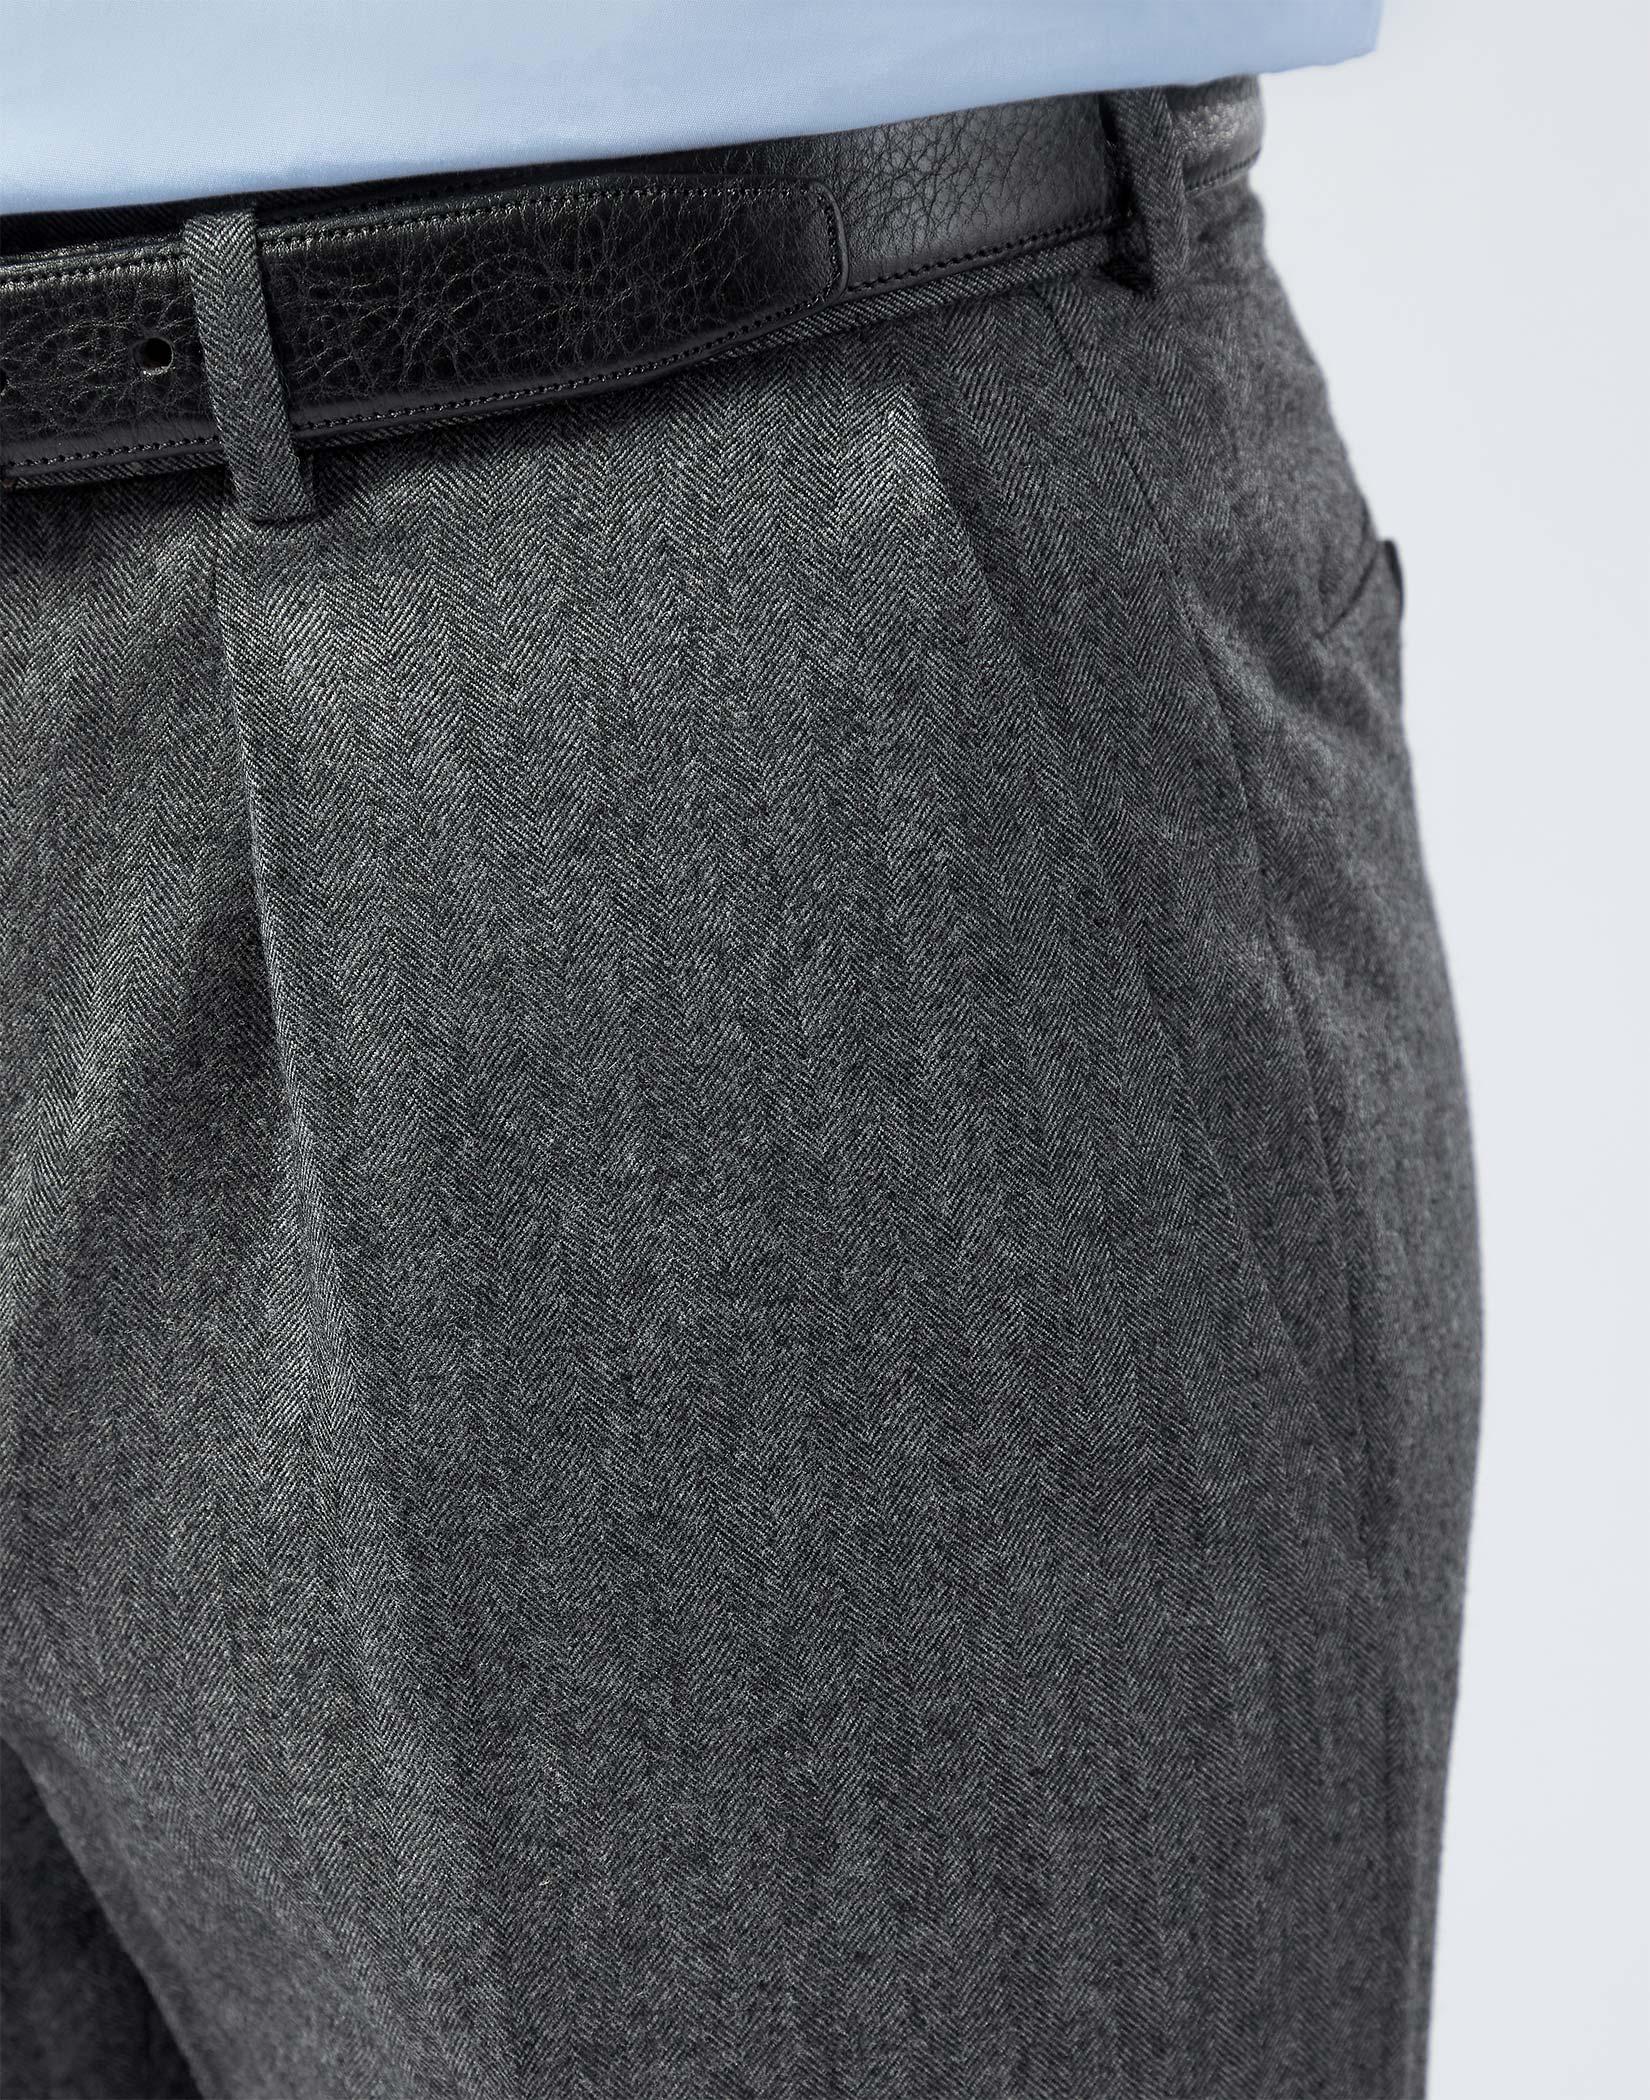 pini parma on Twitter An adaptable pair to complement any smart look Our  light grey flannel trousers from the Soragna Capsule Collection are made  from 100 wool and have a slim fit